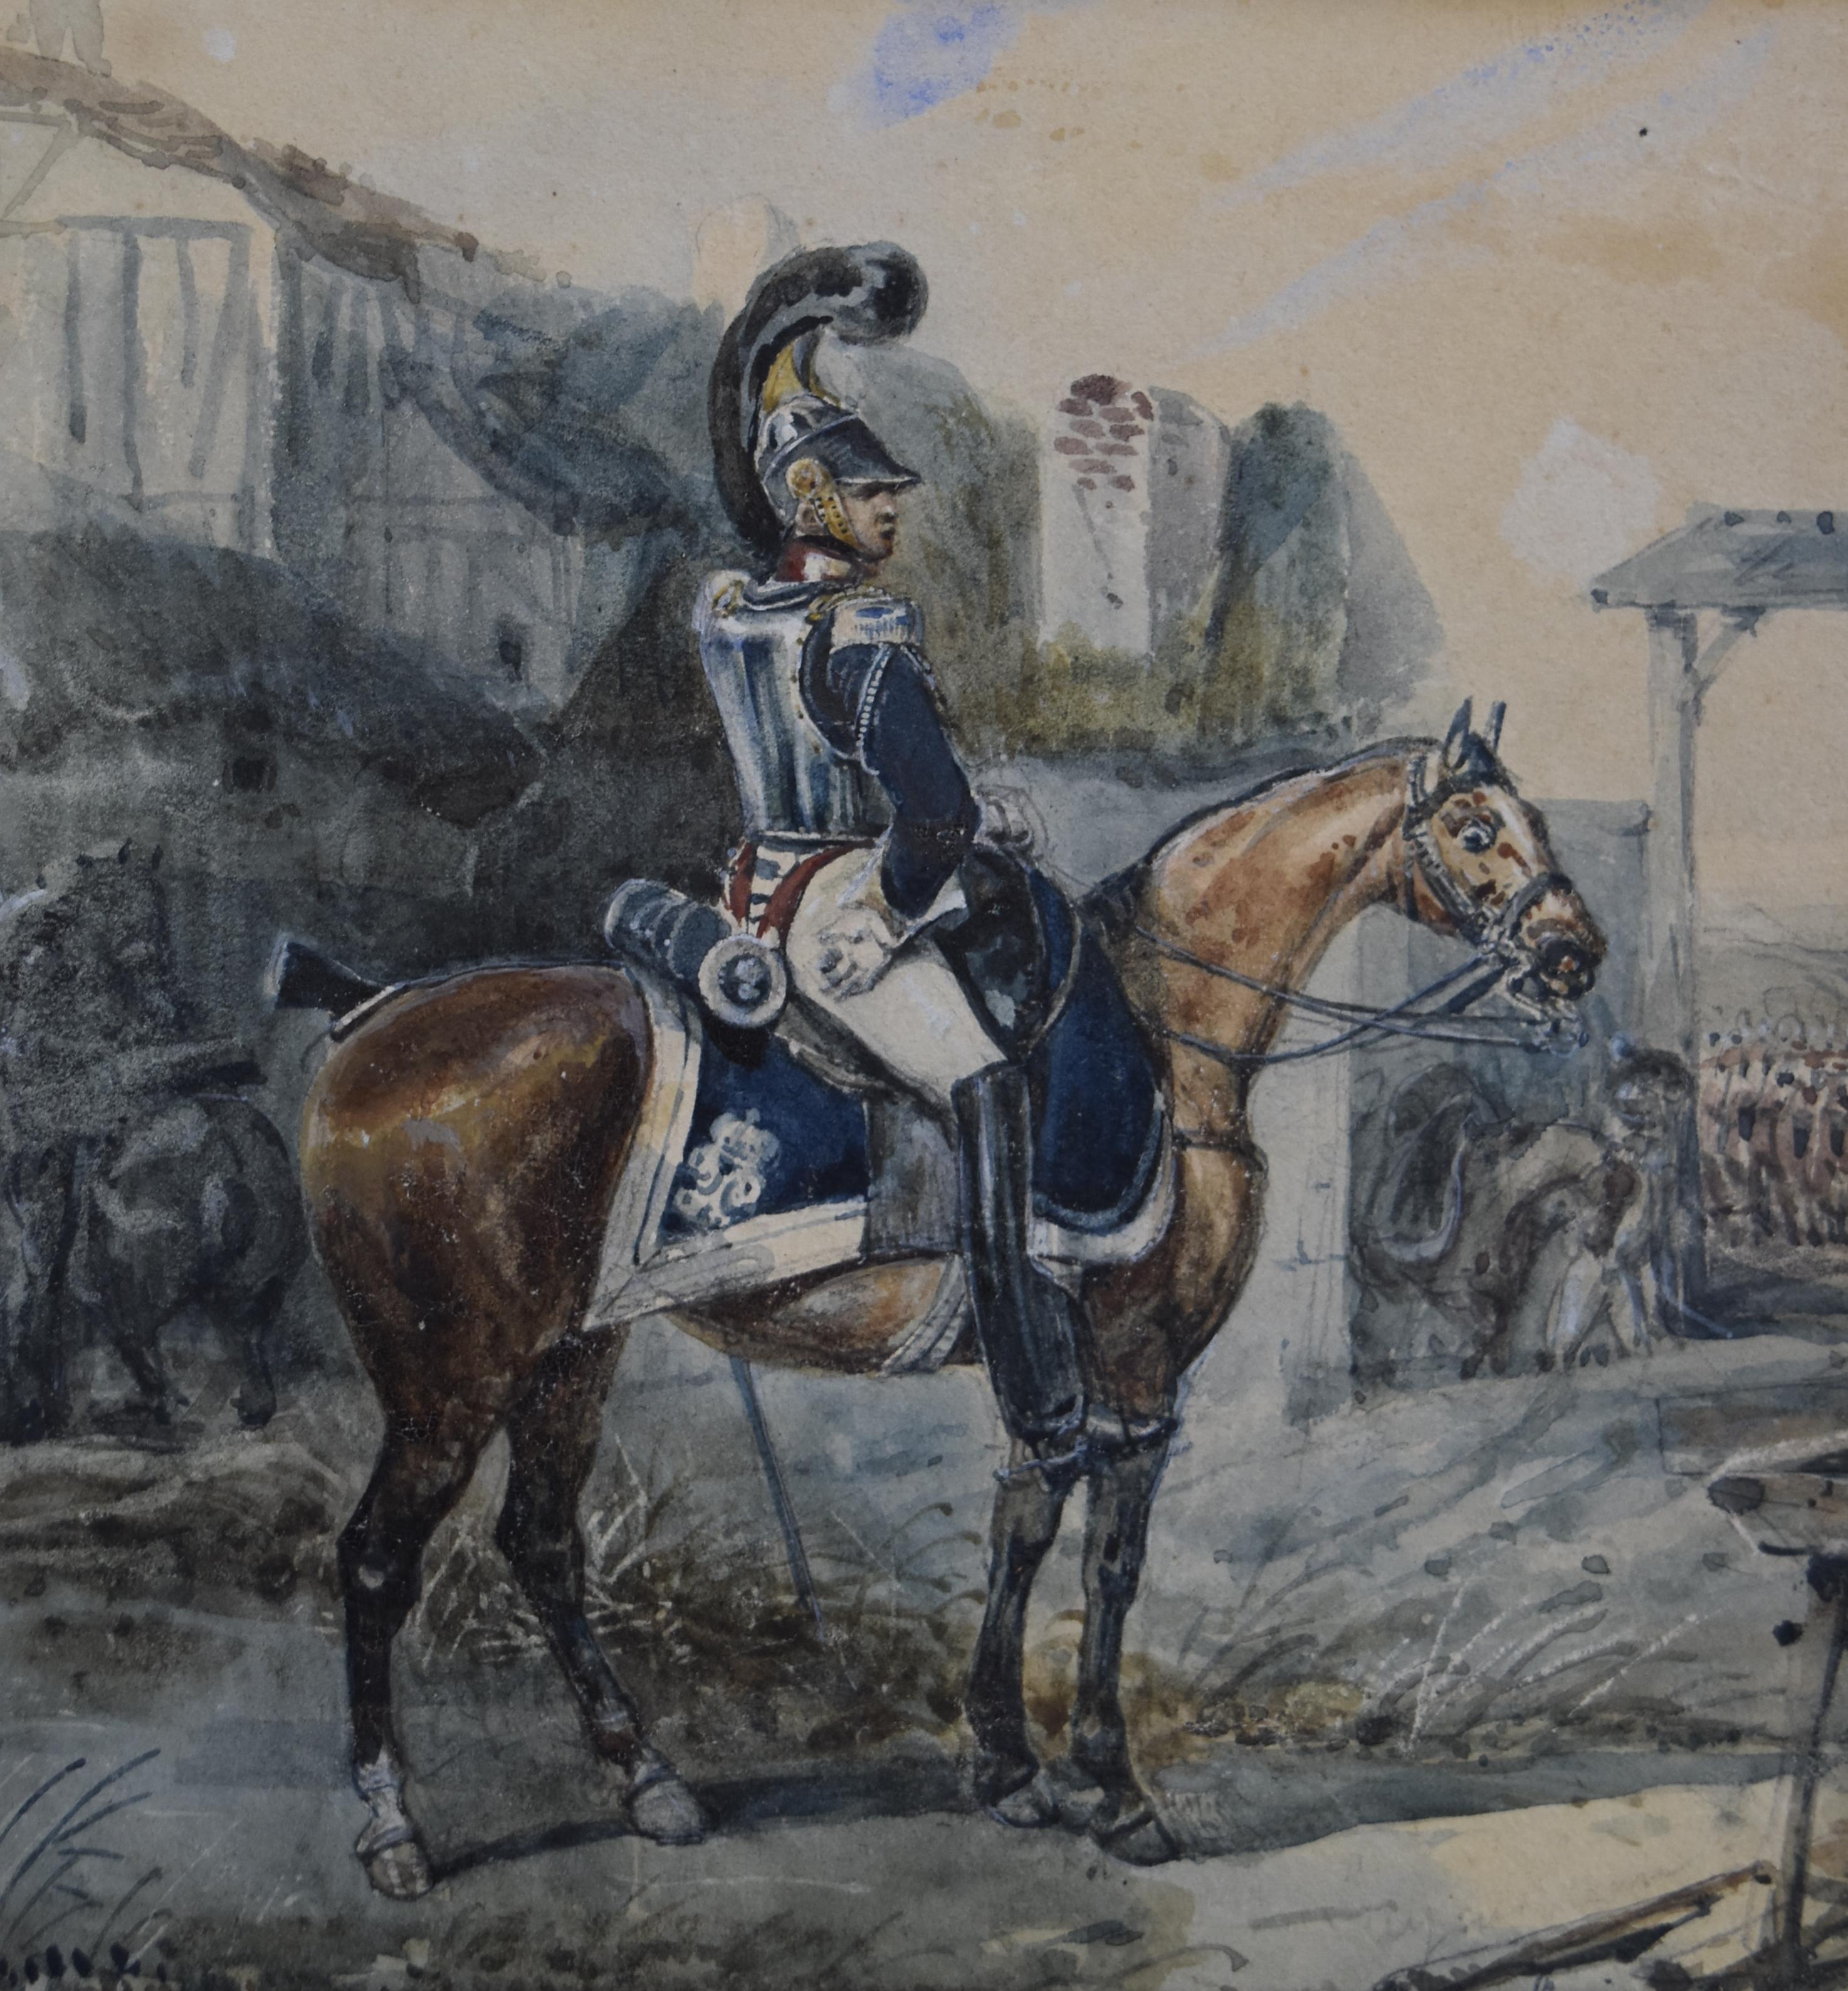 Attributed to Eugene Lami, a Hussar on his horse, watercolor 2